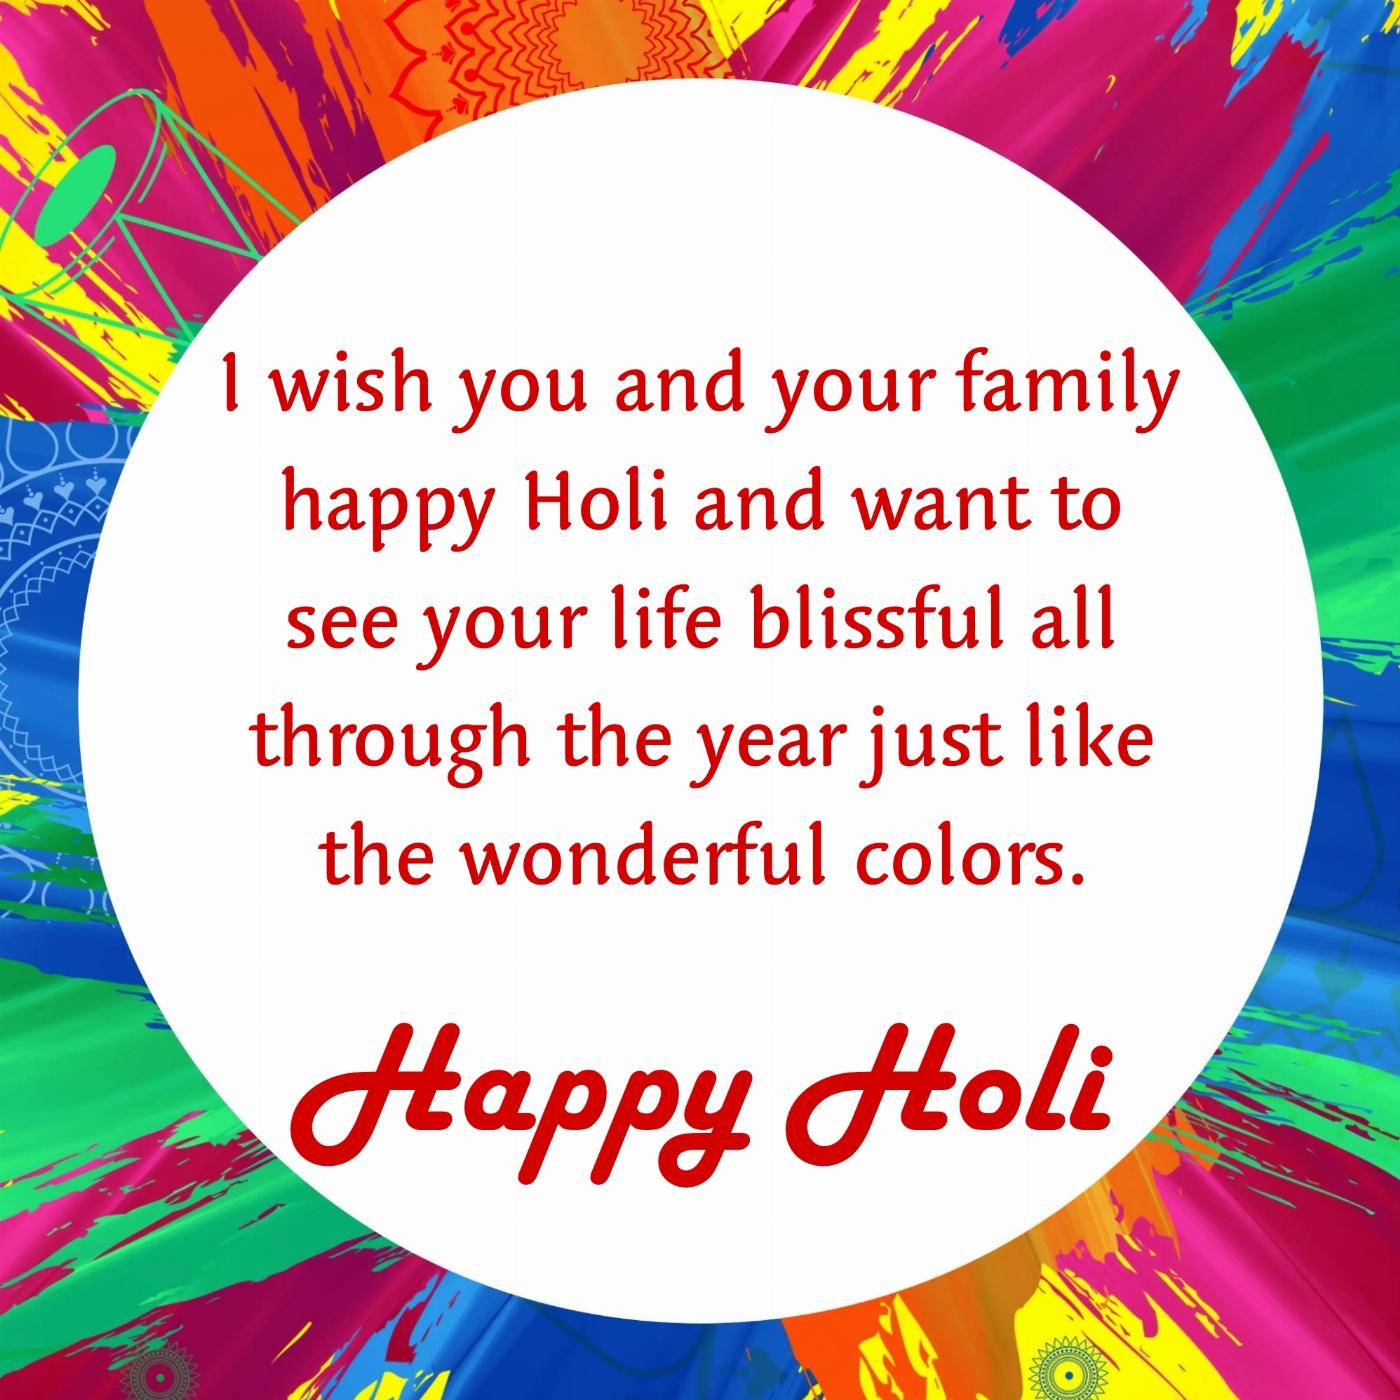 I wish you and your family happy Holi and want to see your life blissful